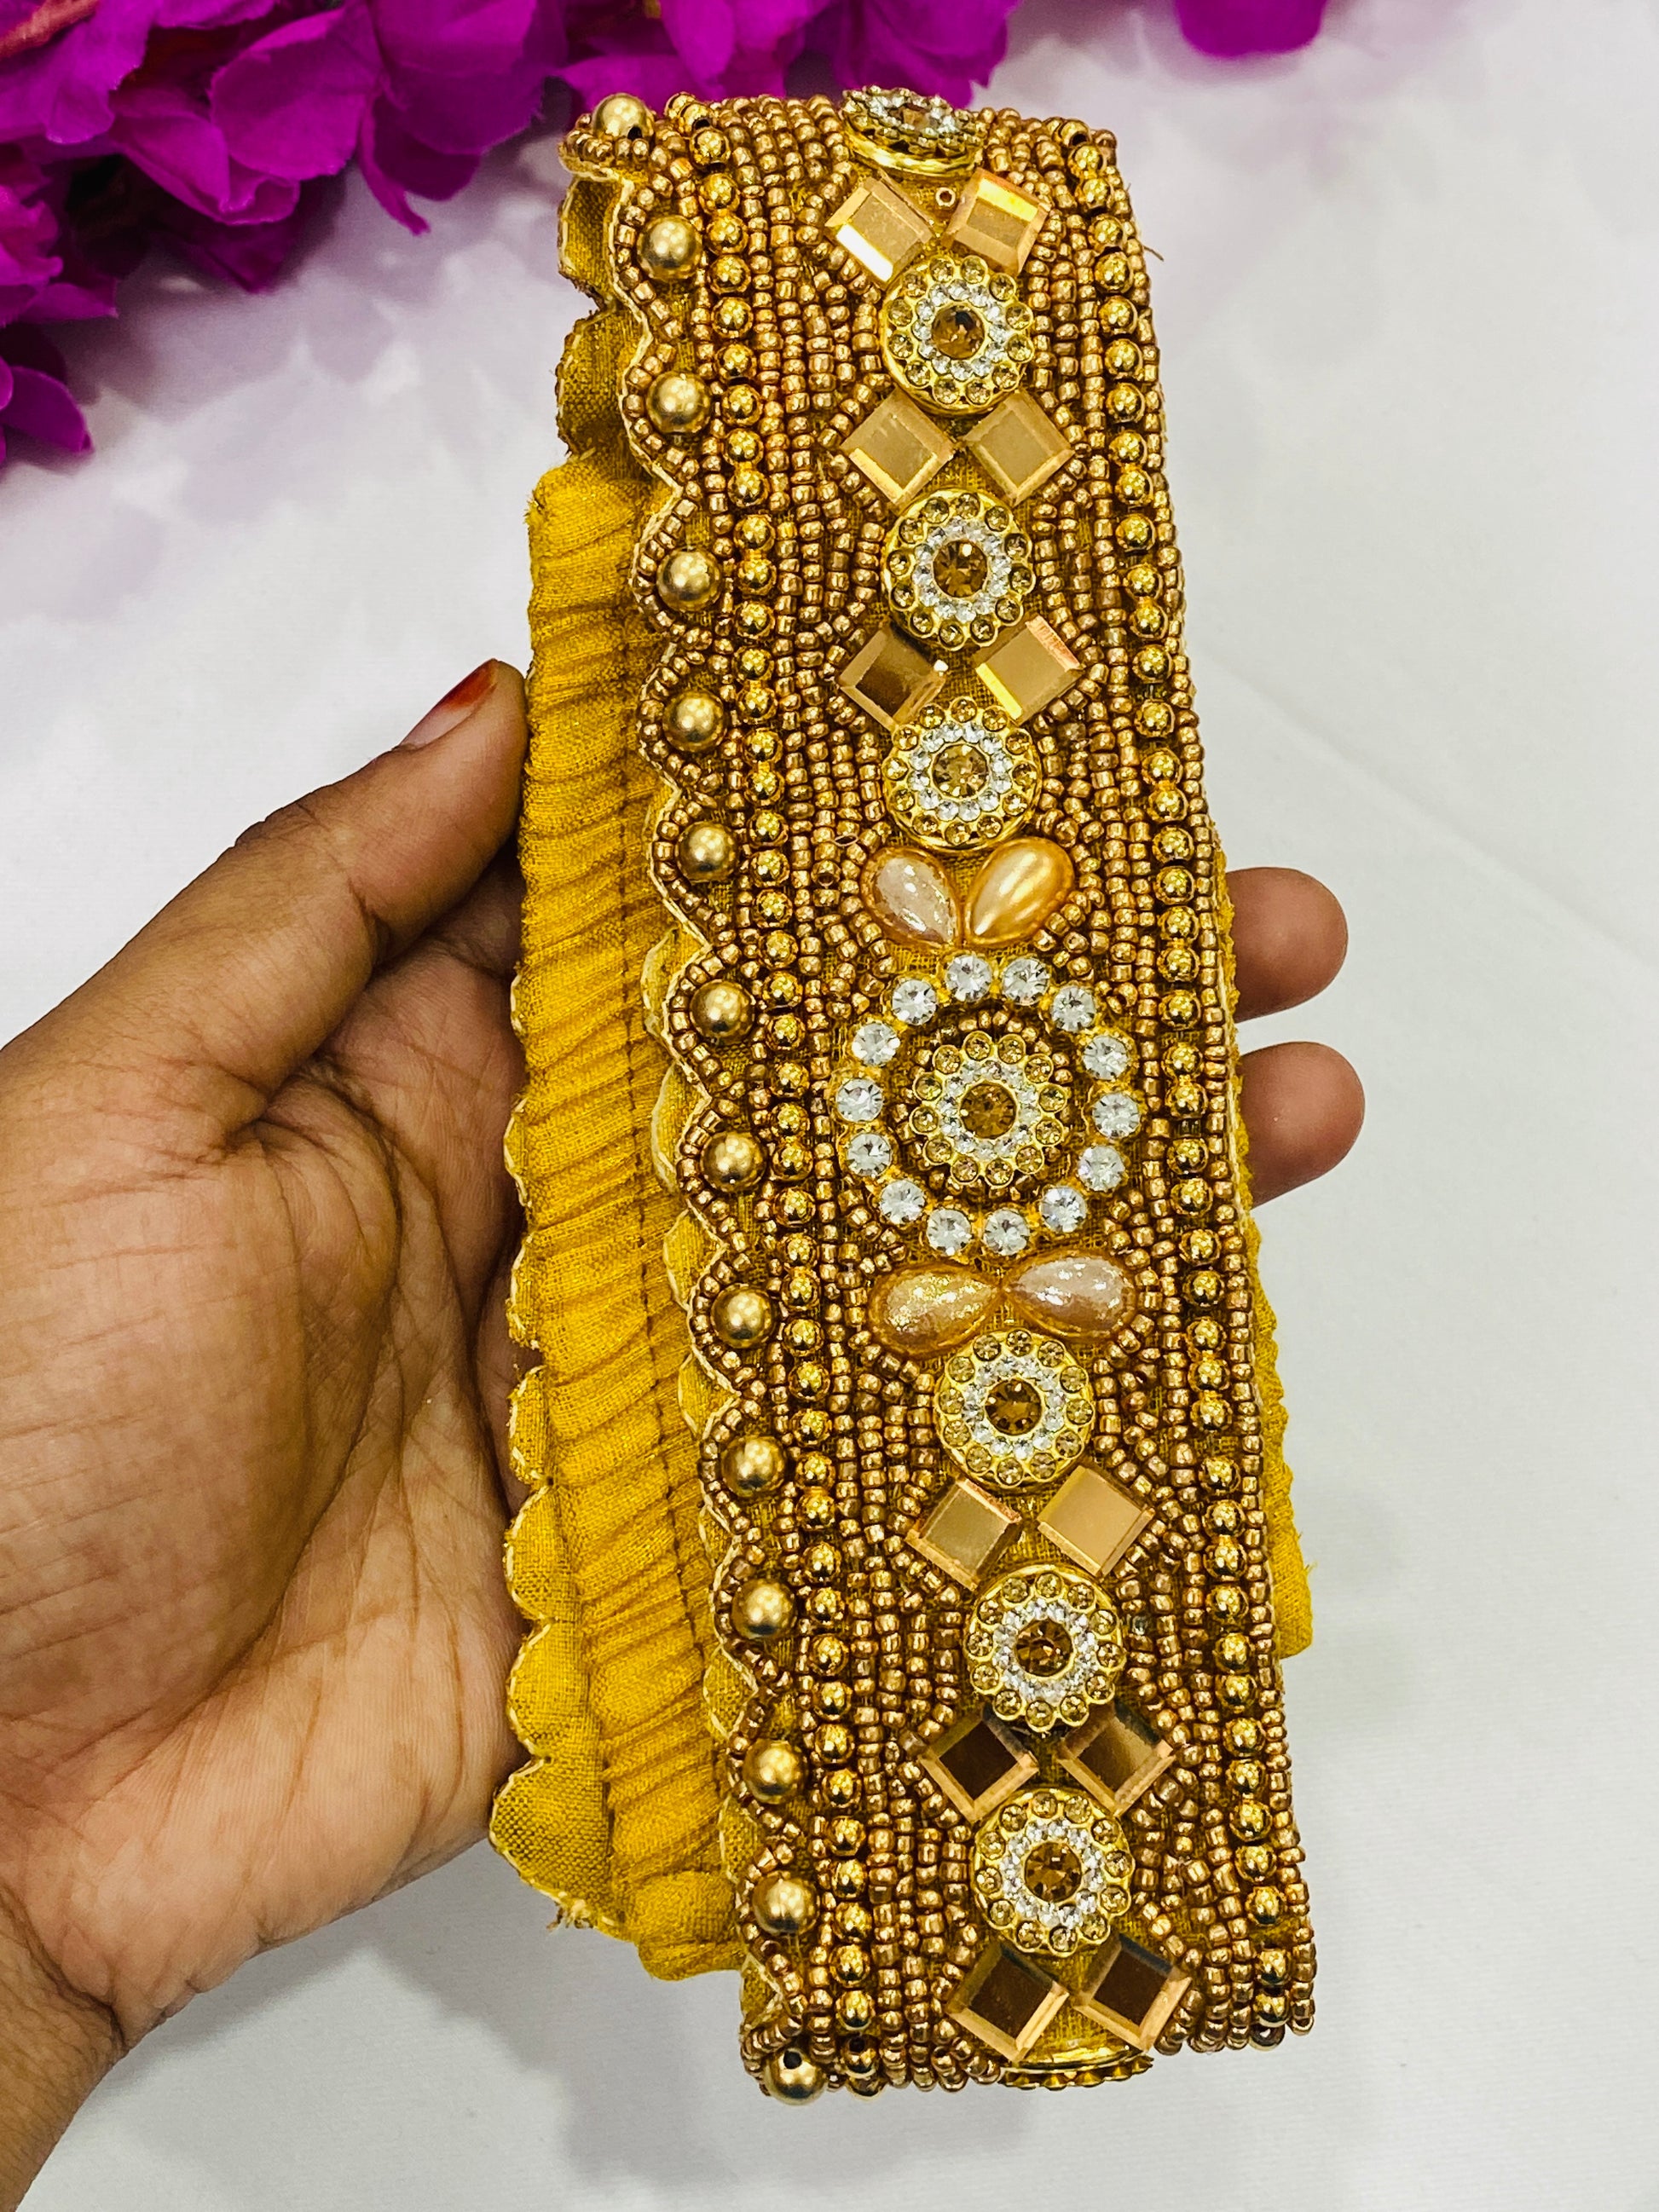 Saree Belt With Stone Work In Paradise Valley